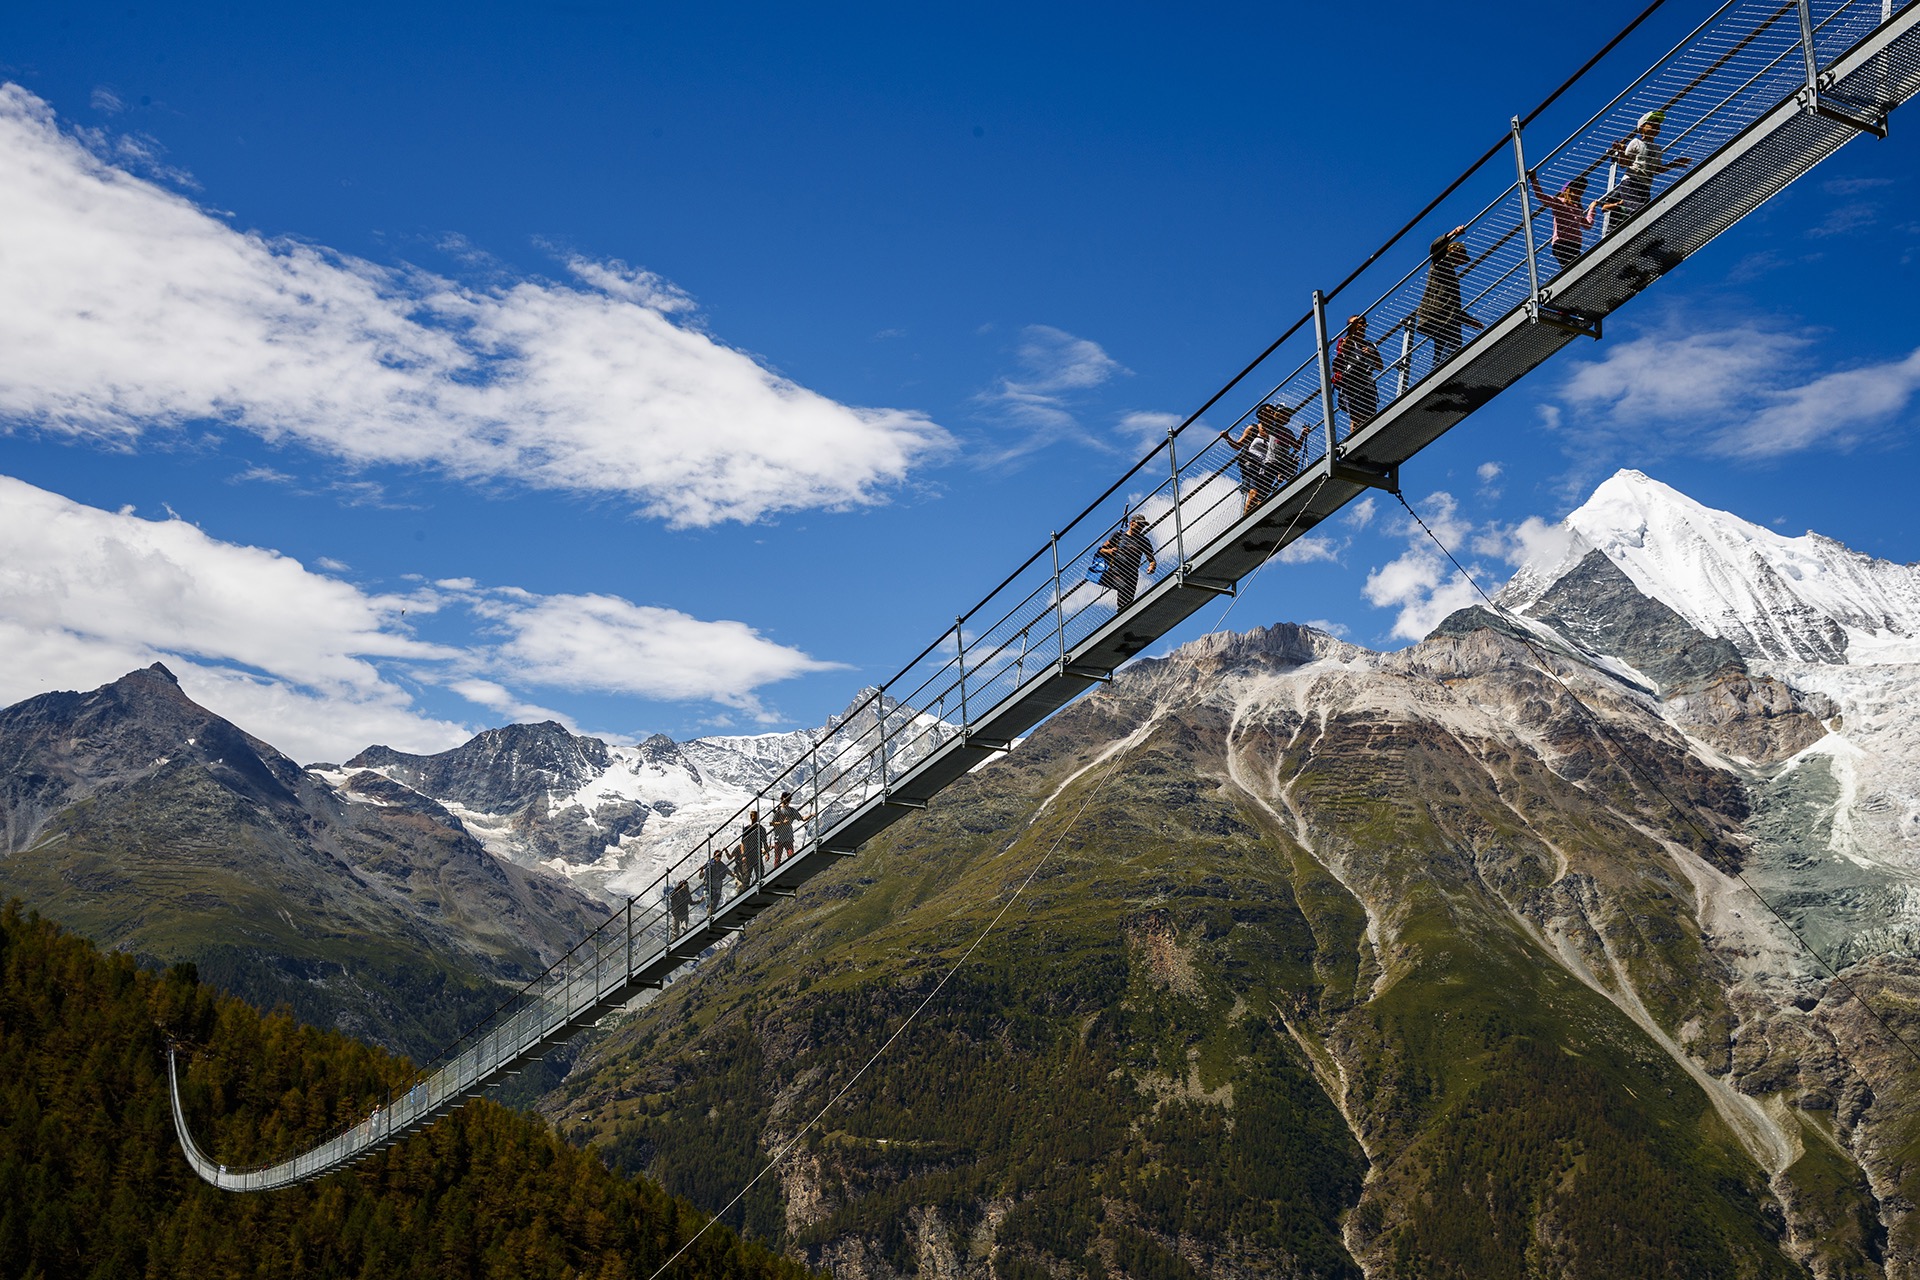 People walk on the "Europabruecke", that is supposed to be the world's longest pedestrian suspension bridge with a length of 494m, after the official inauguration of the construction in Randa, Switzerland, on Saturday, July 29, 2017. The bridge is situated on the Europaweg that connects the villages of Zermatt and Graechen. (Valentin Flauraud/Keystone via AP)